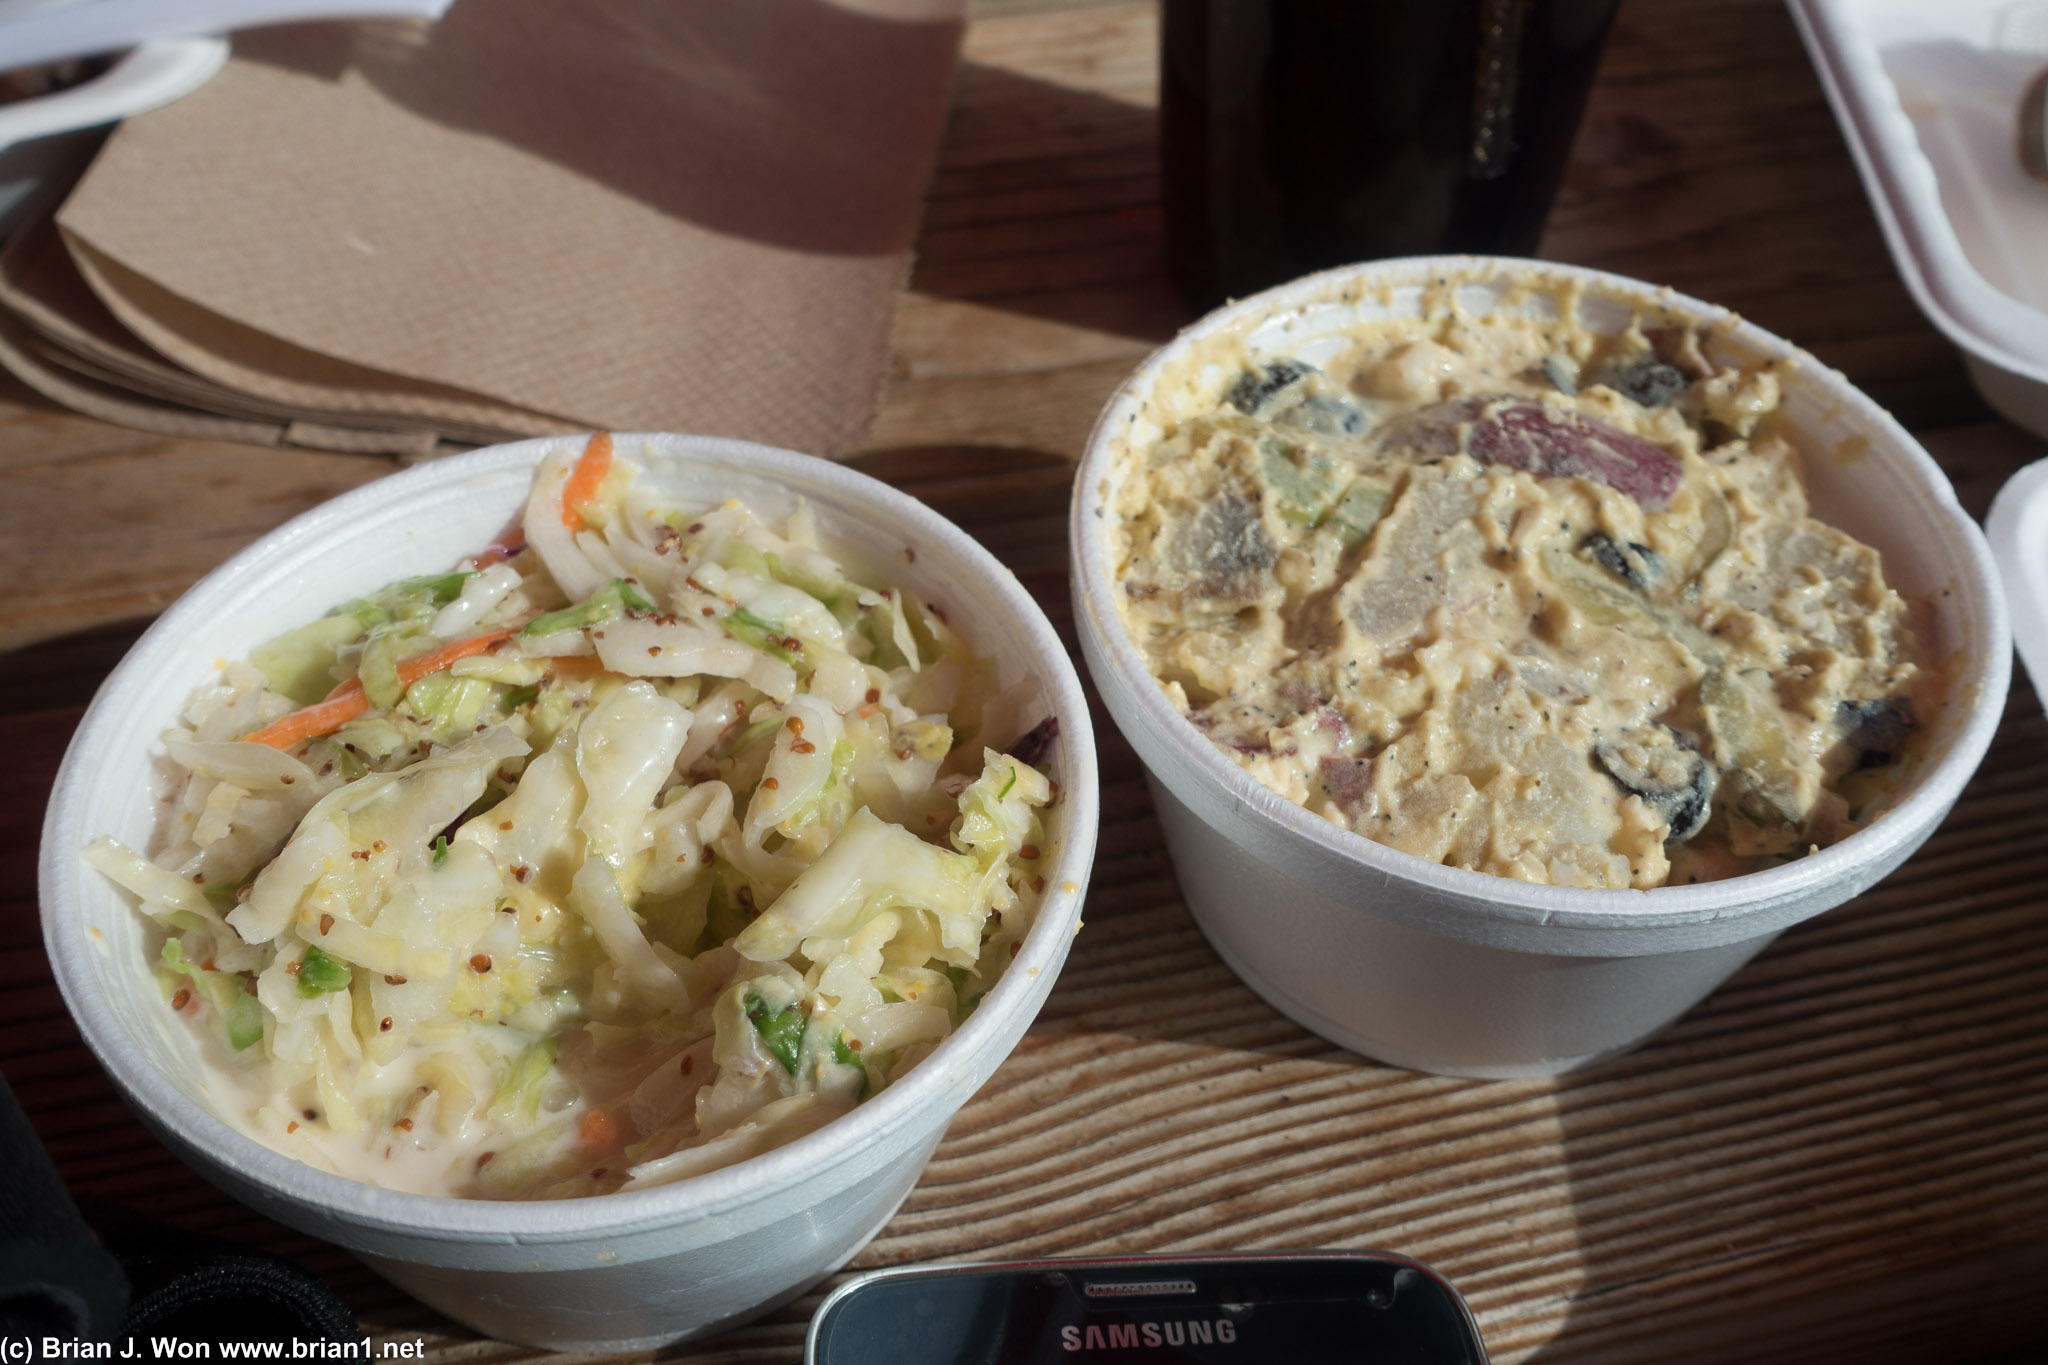 Very flavorful coleslaw and potato salad. Latter was simple yet quite fancy on the ingredients.